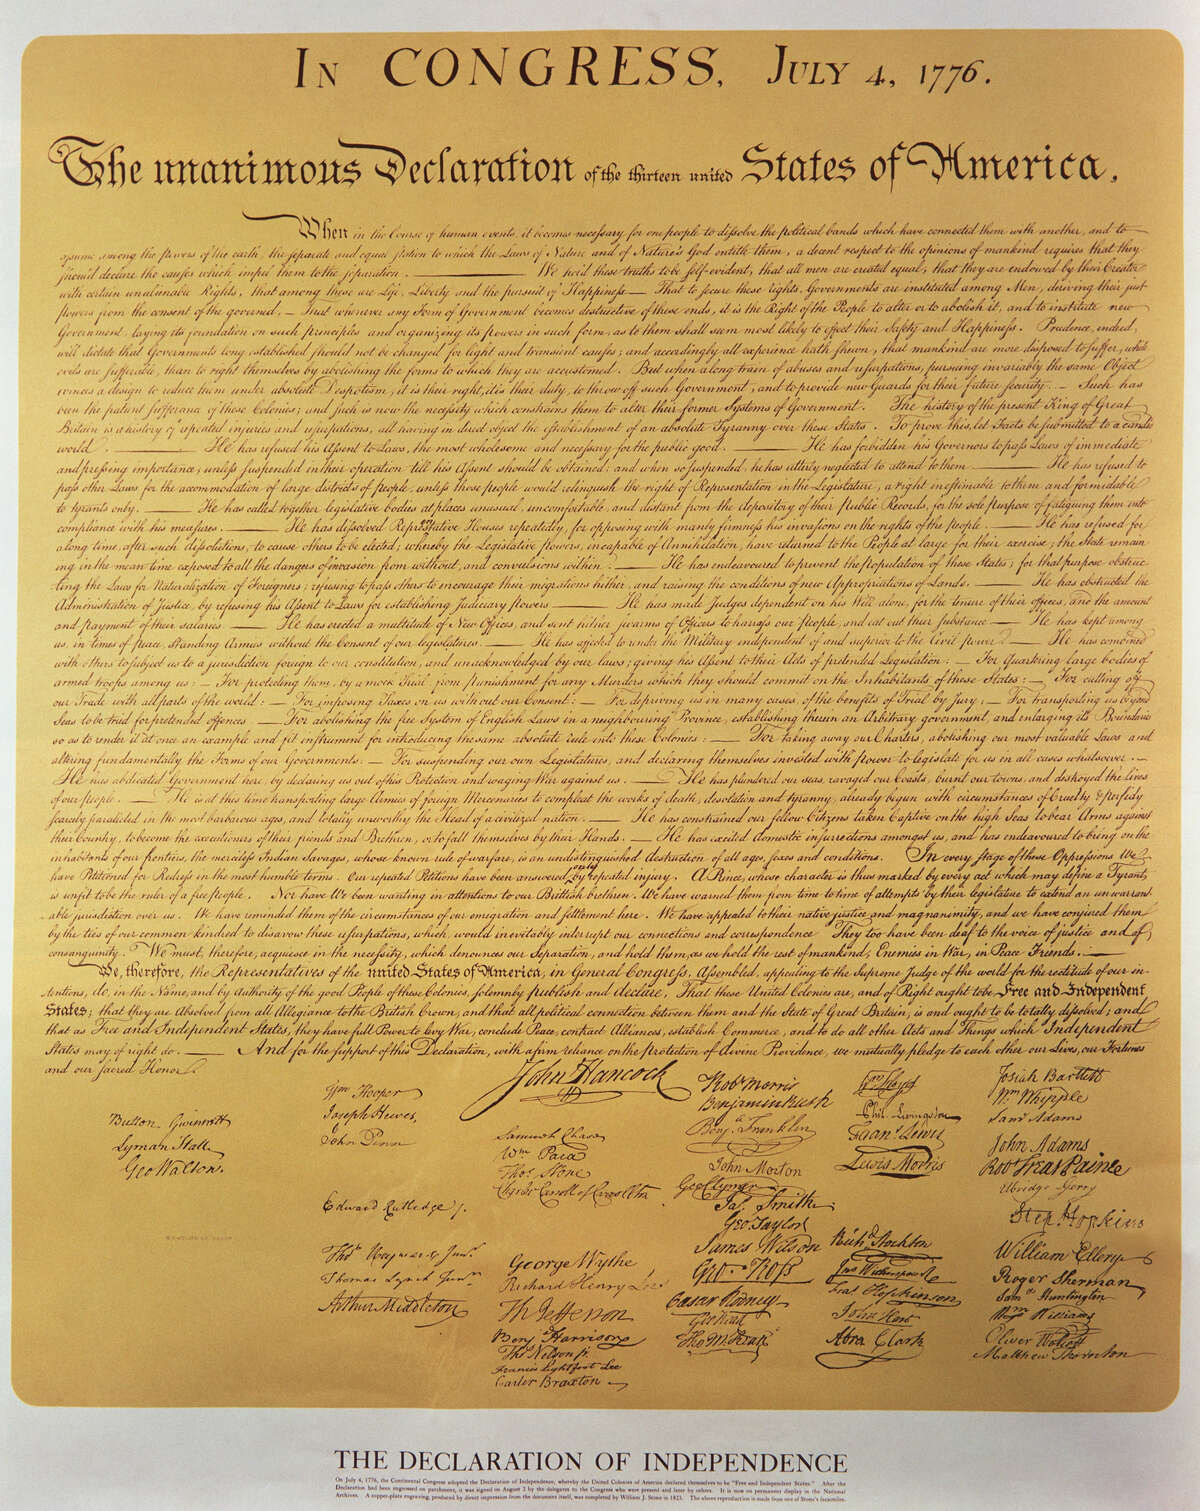 u-s-declaration-of-independence-full-text-what-america-s-founding-document-actually-says